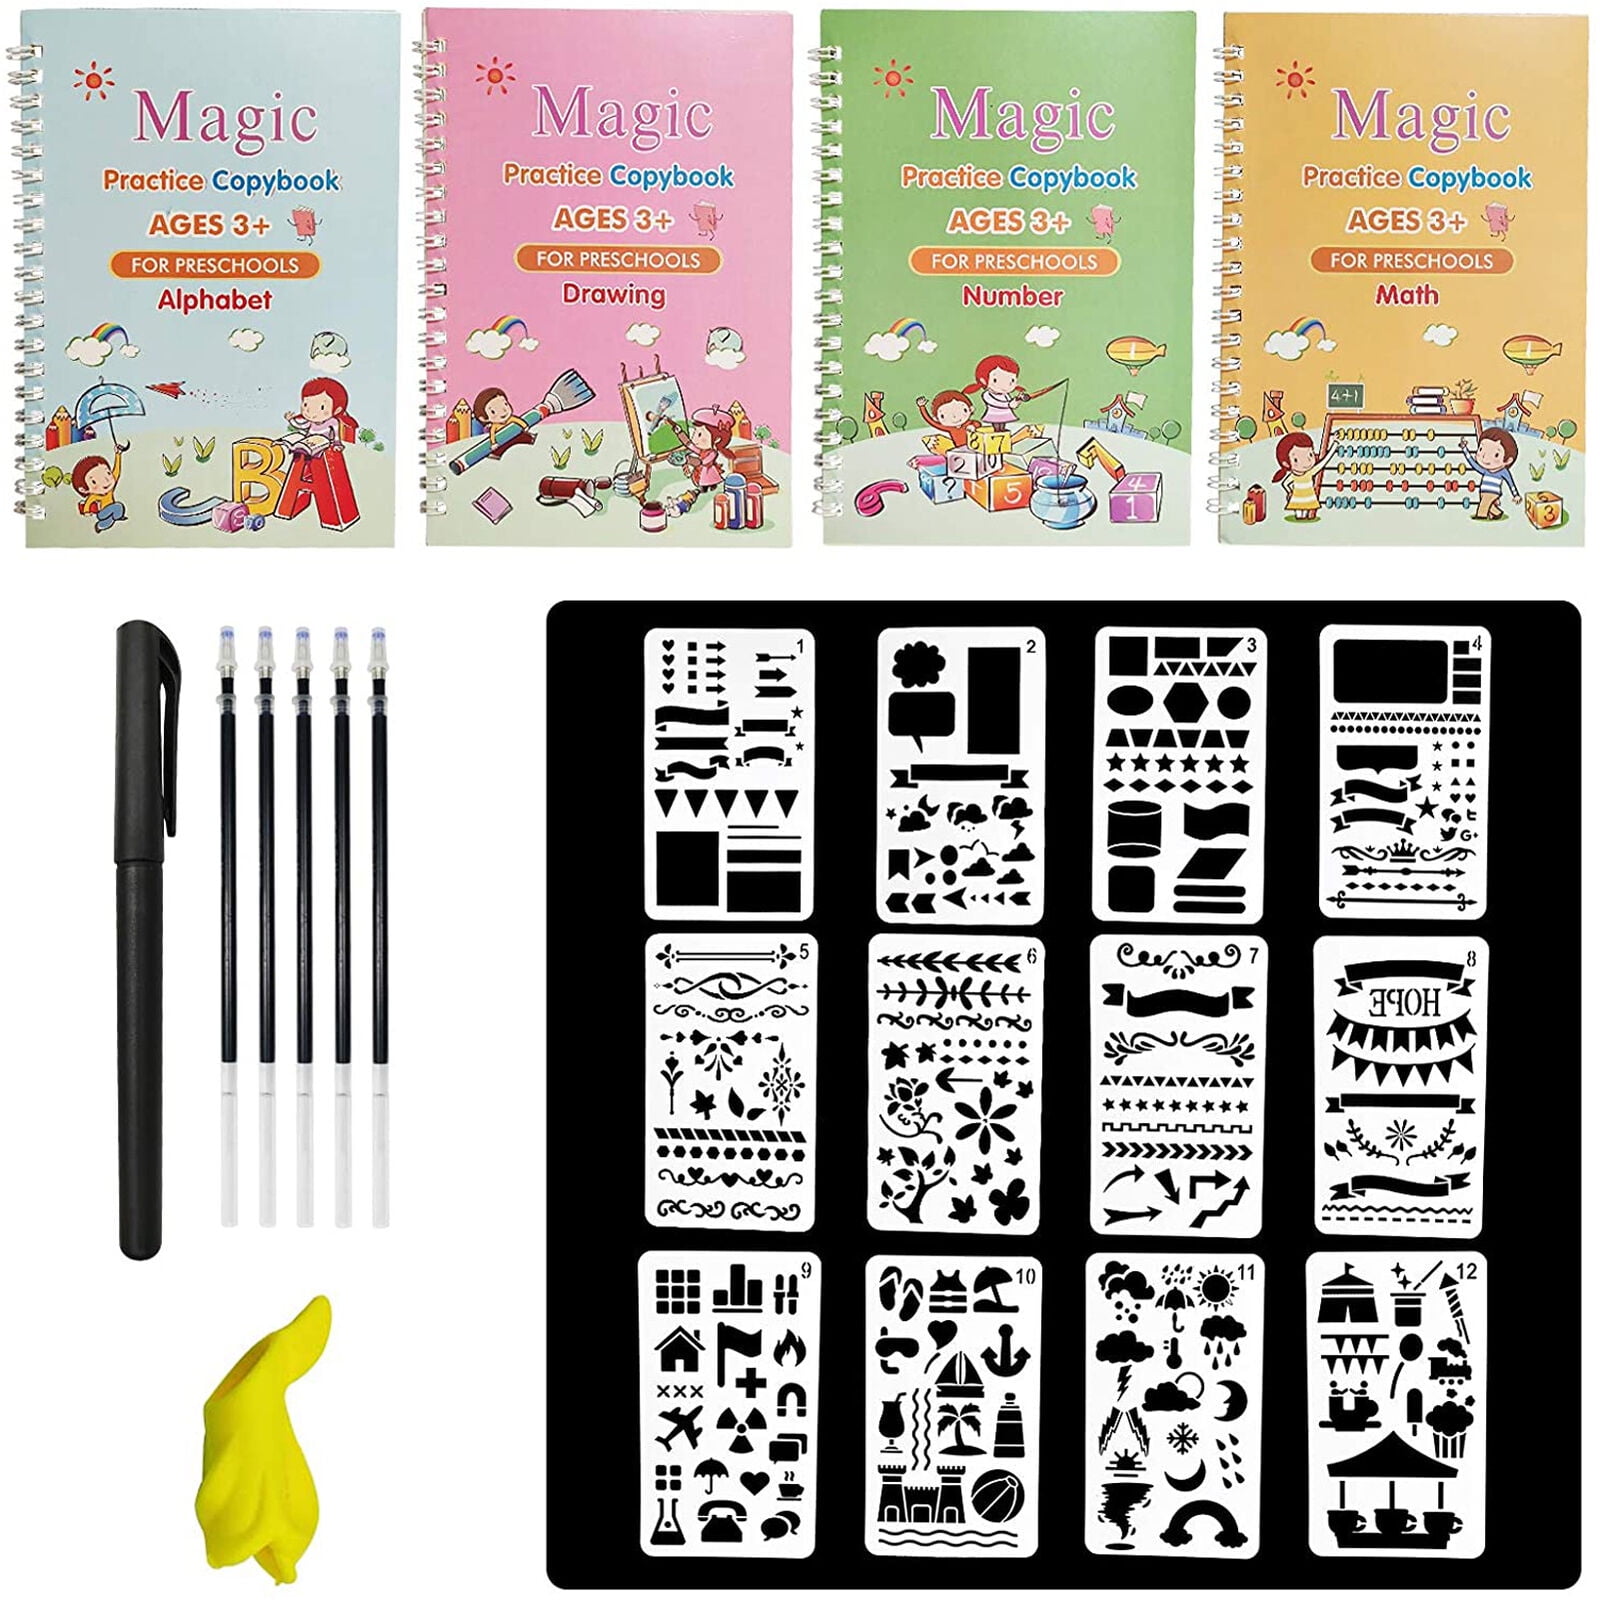  4 Pc Magic Practice Copybook,Reusable Grooved Writing Books, Handwriting Book Practice For Kids,Groovd Kids Writing Preschool For Kids  Ages 3-8 Calligraphy